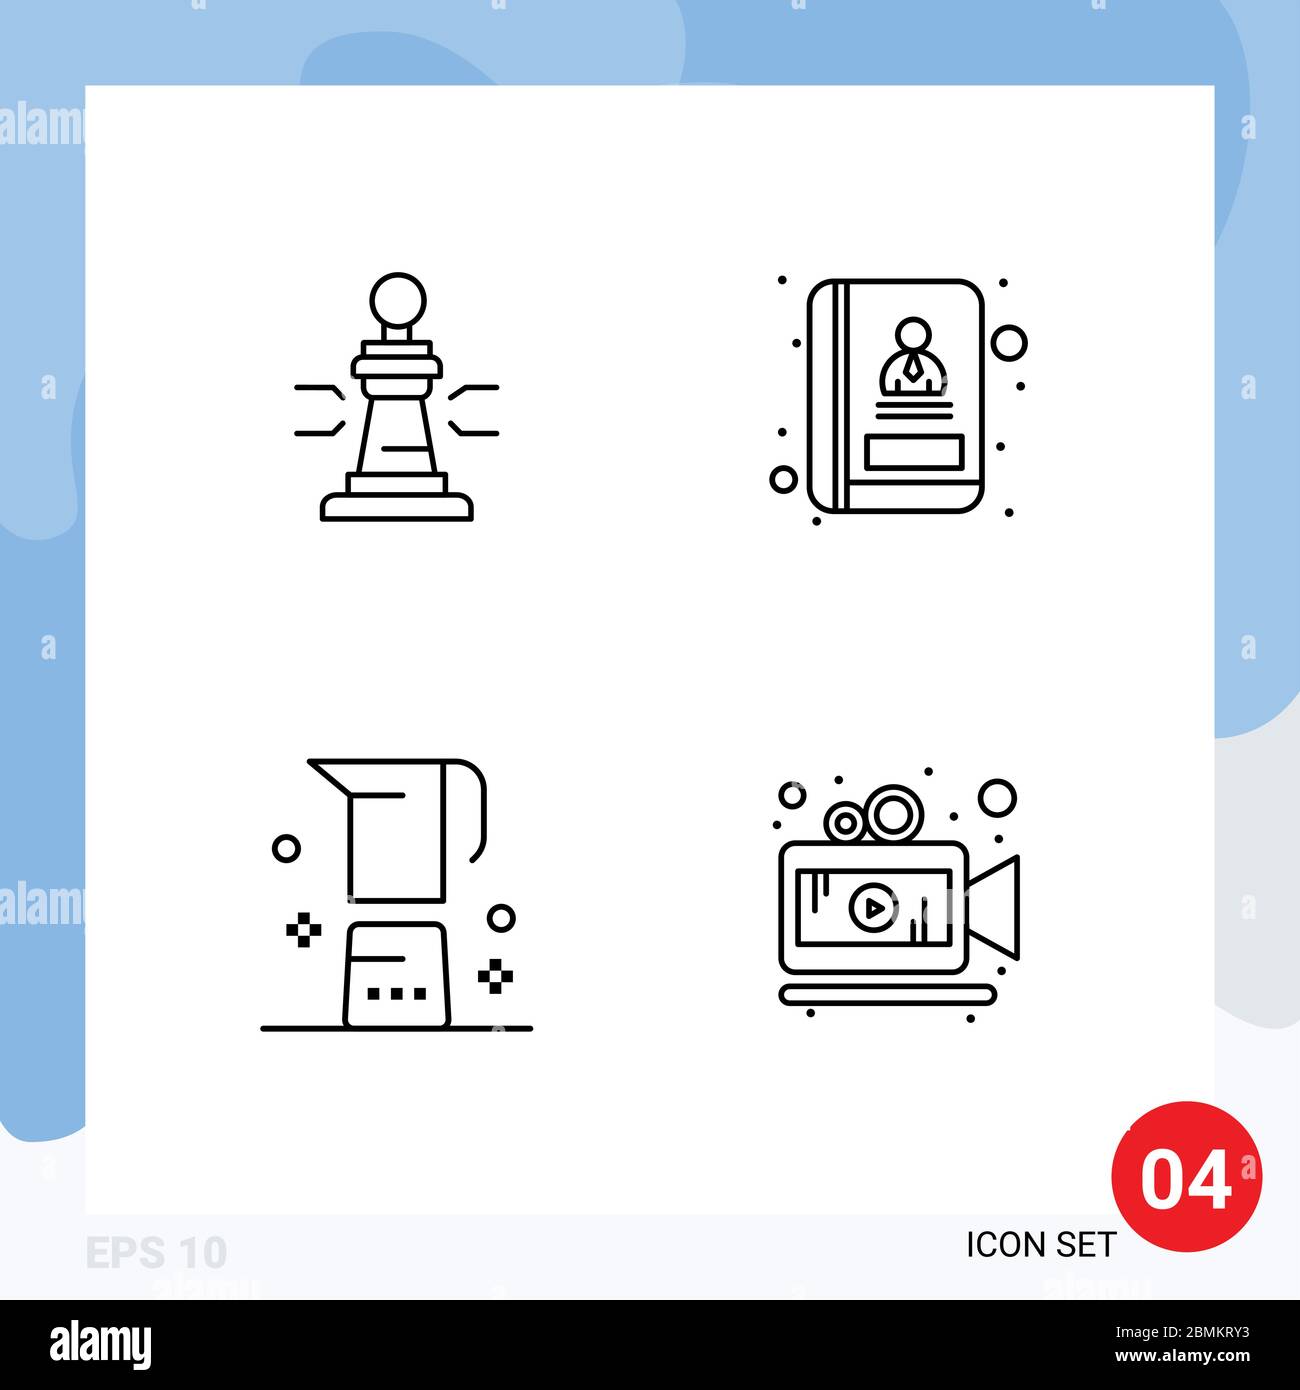 4 Universal Line Signs Symbols of chess, coffee, king, book, maker Editable Vector Design Elements Stock Vector